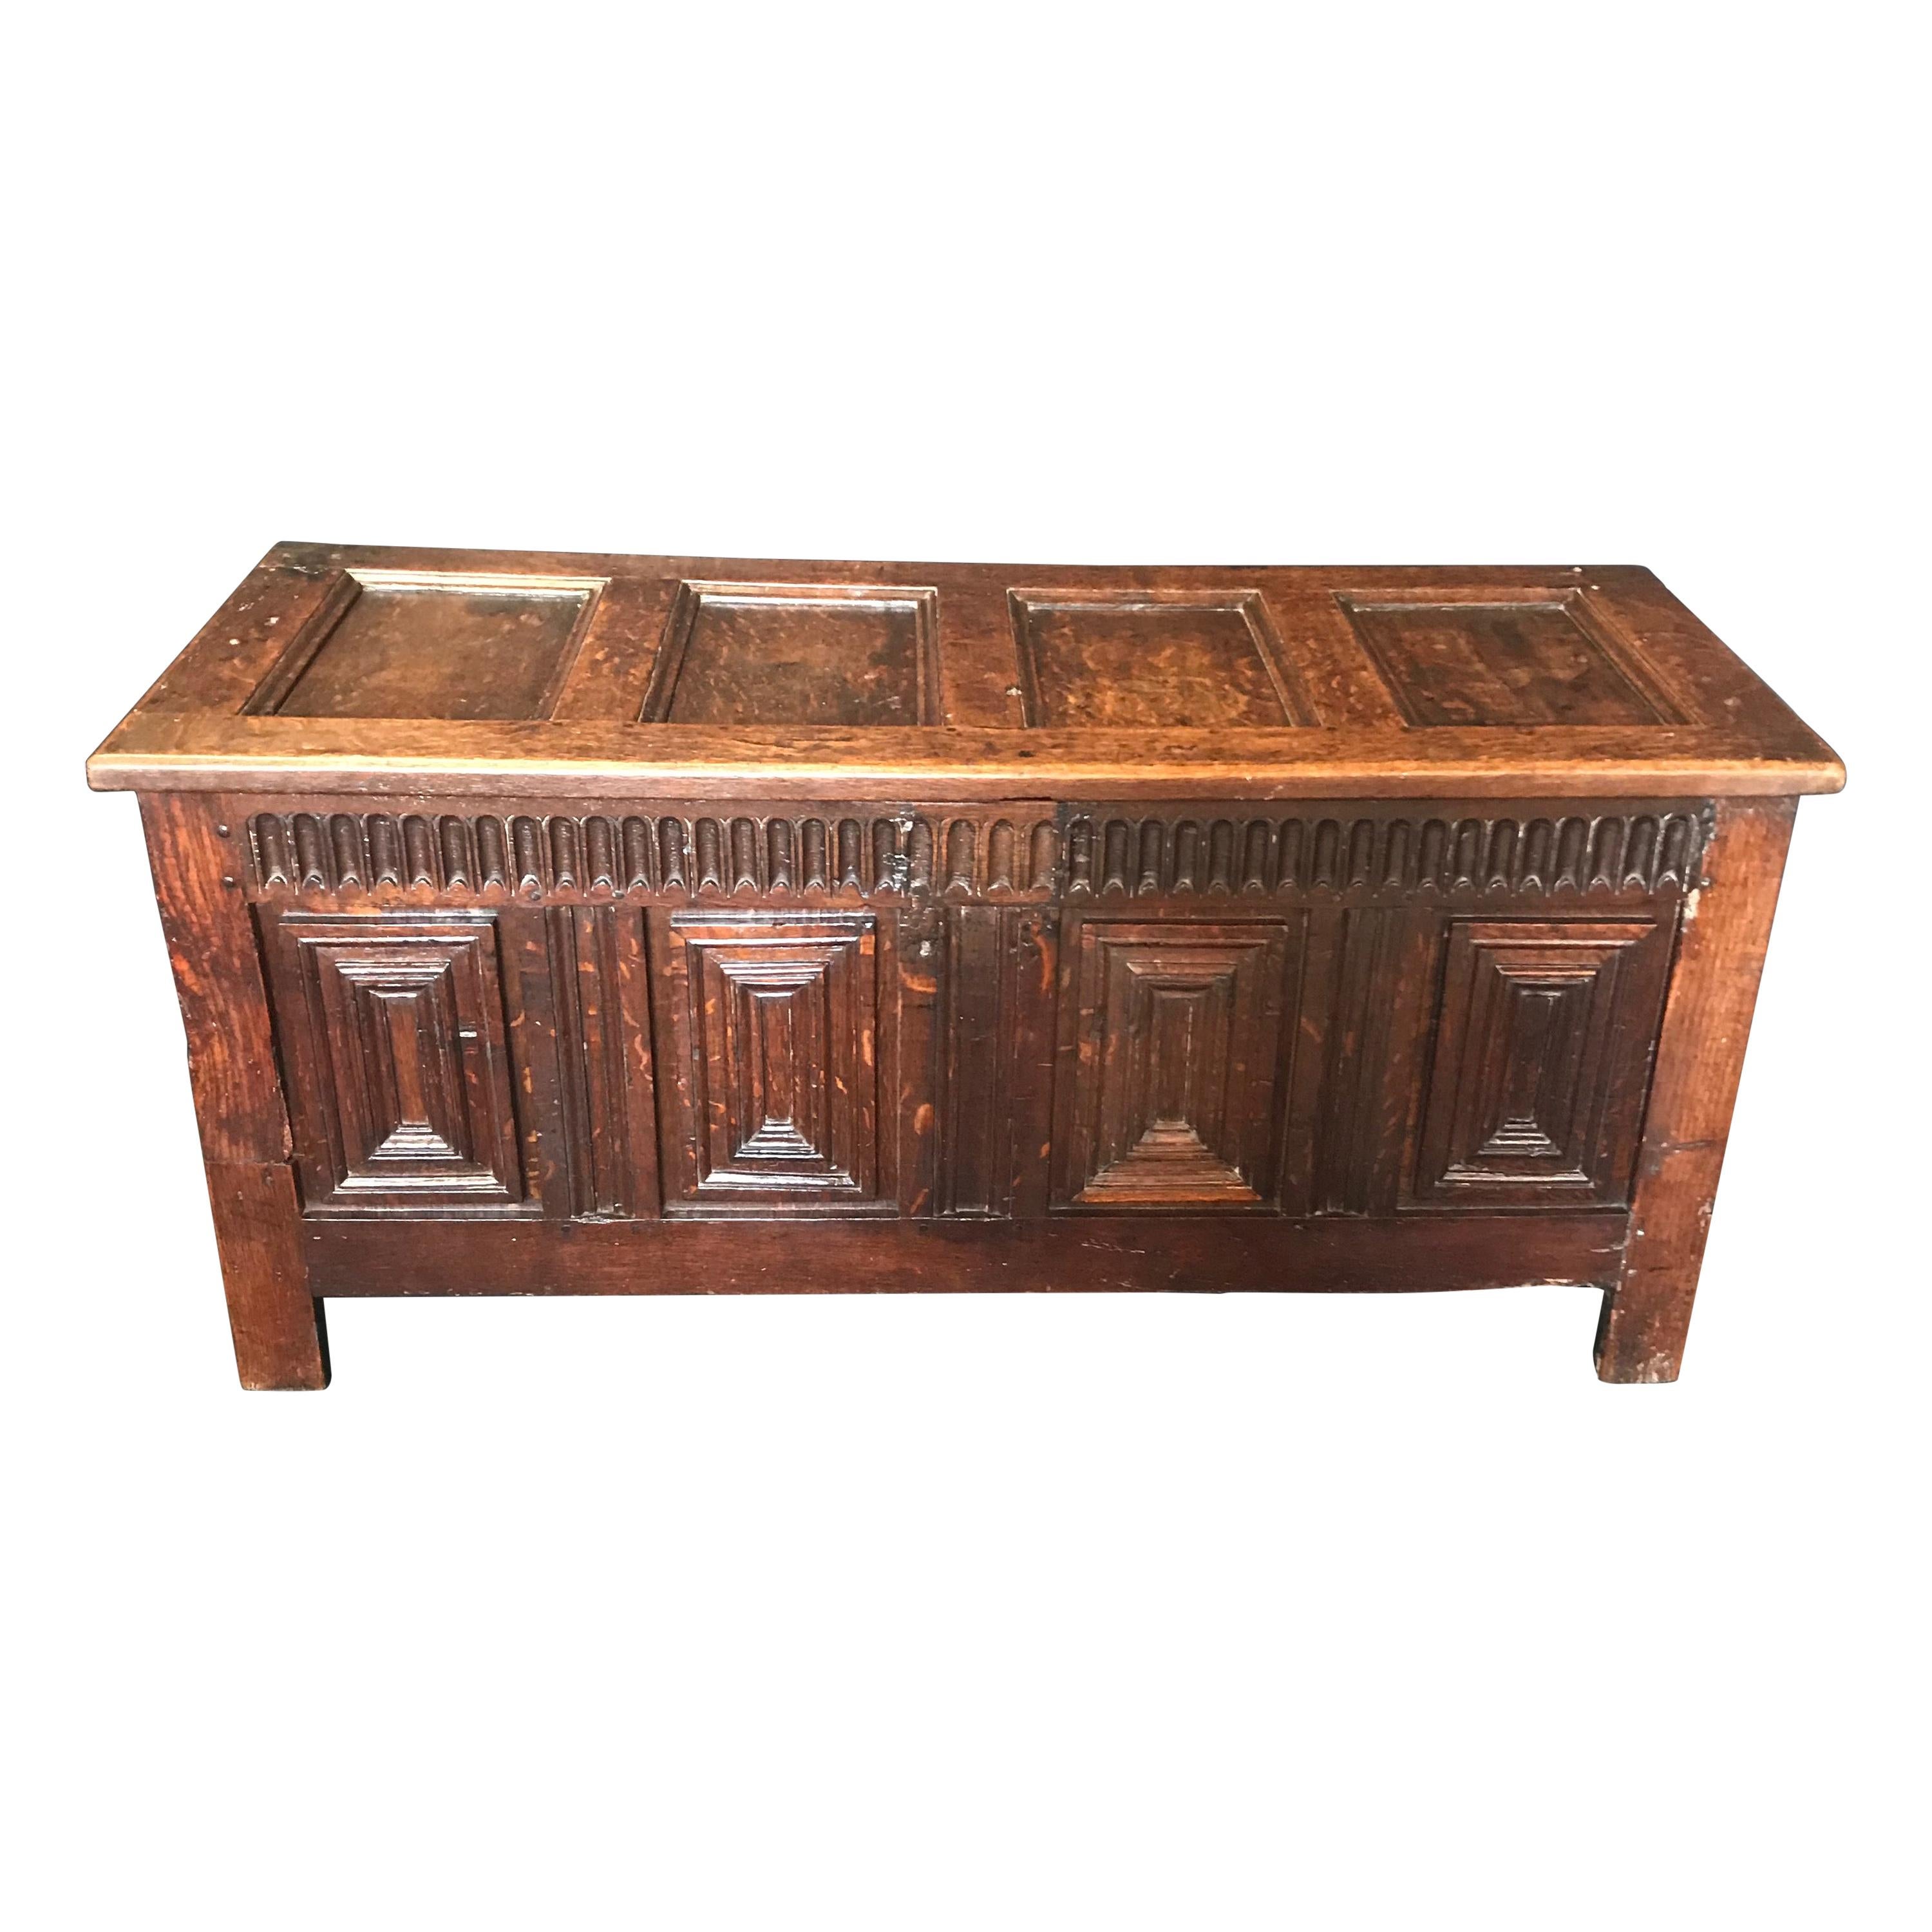 Stunning 18th Century Highly Carved Paneled French Coffer Chest